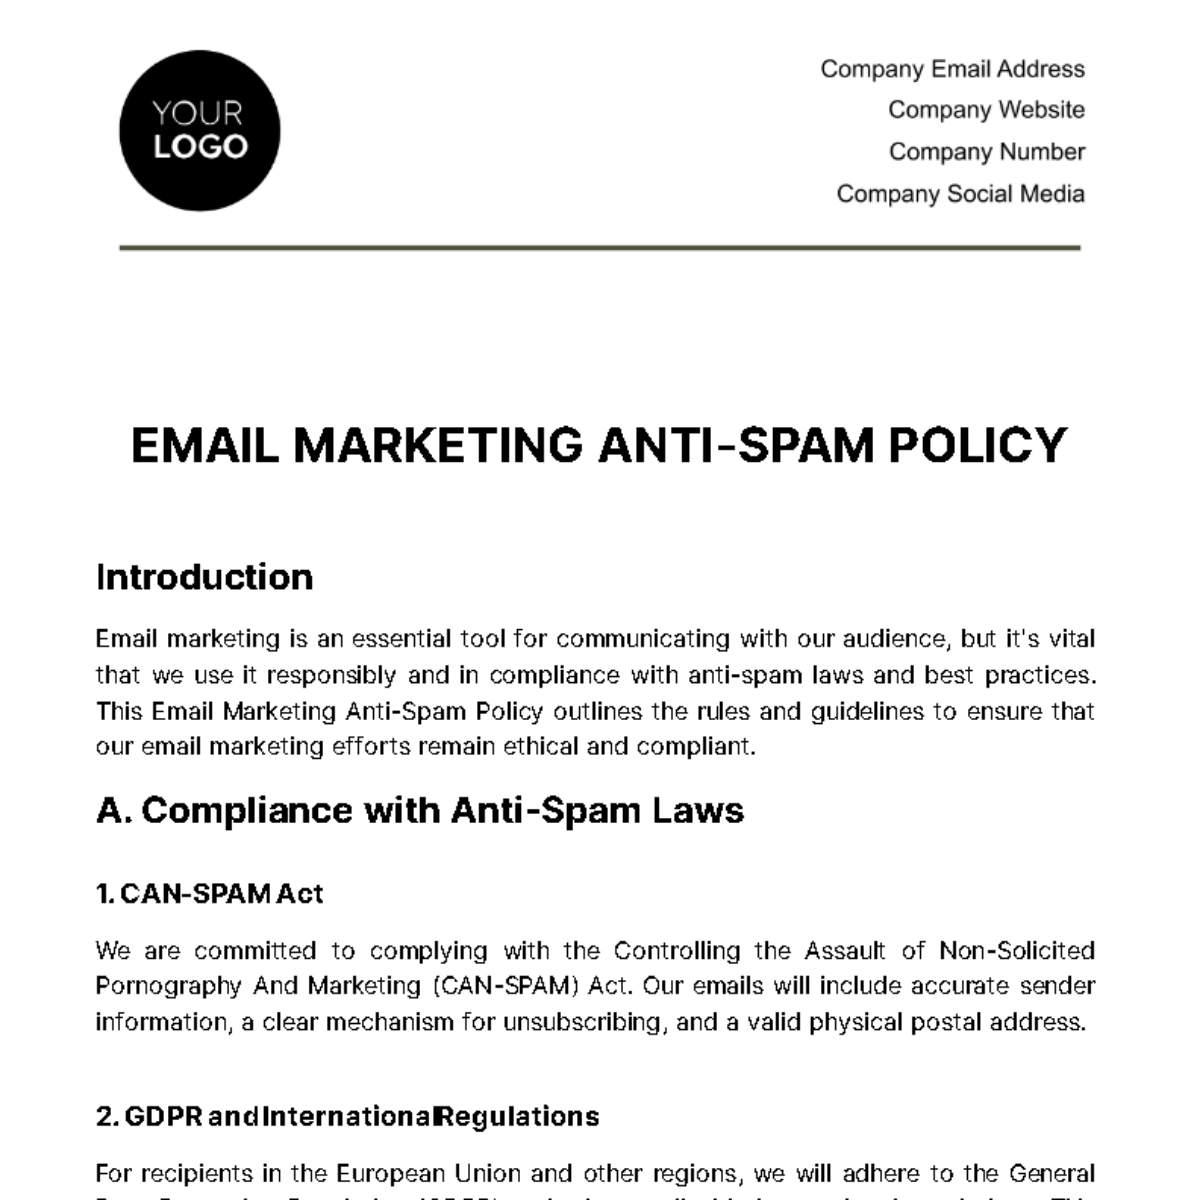 Email Marketing Anti-Spam Policy Template